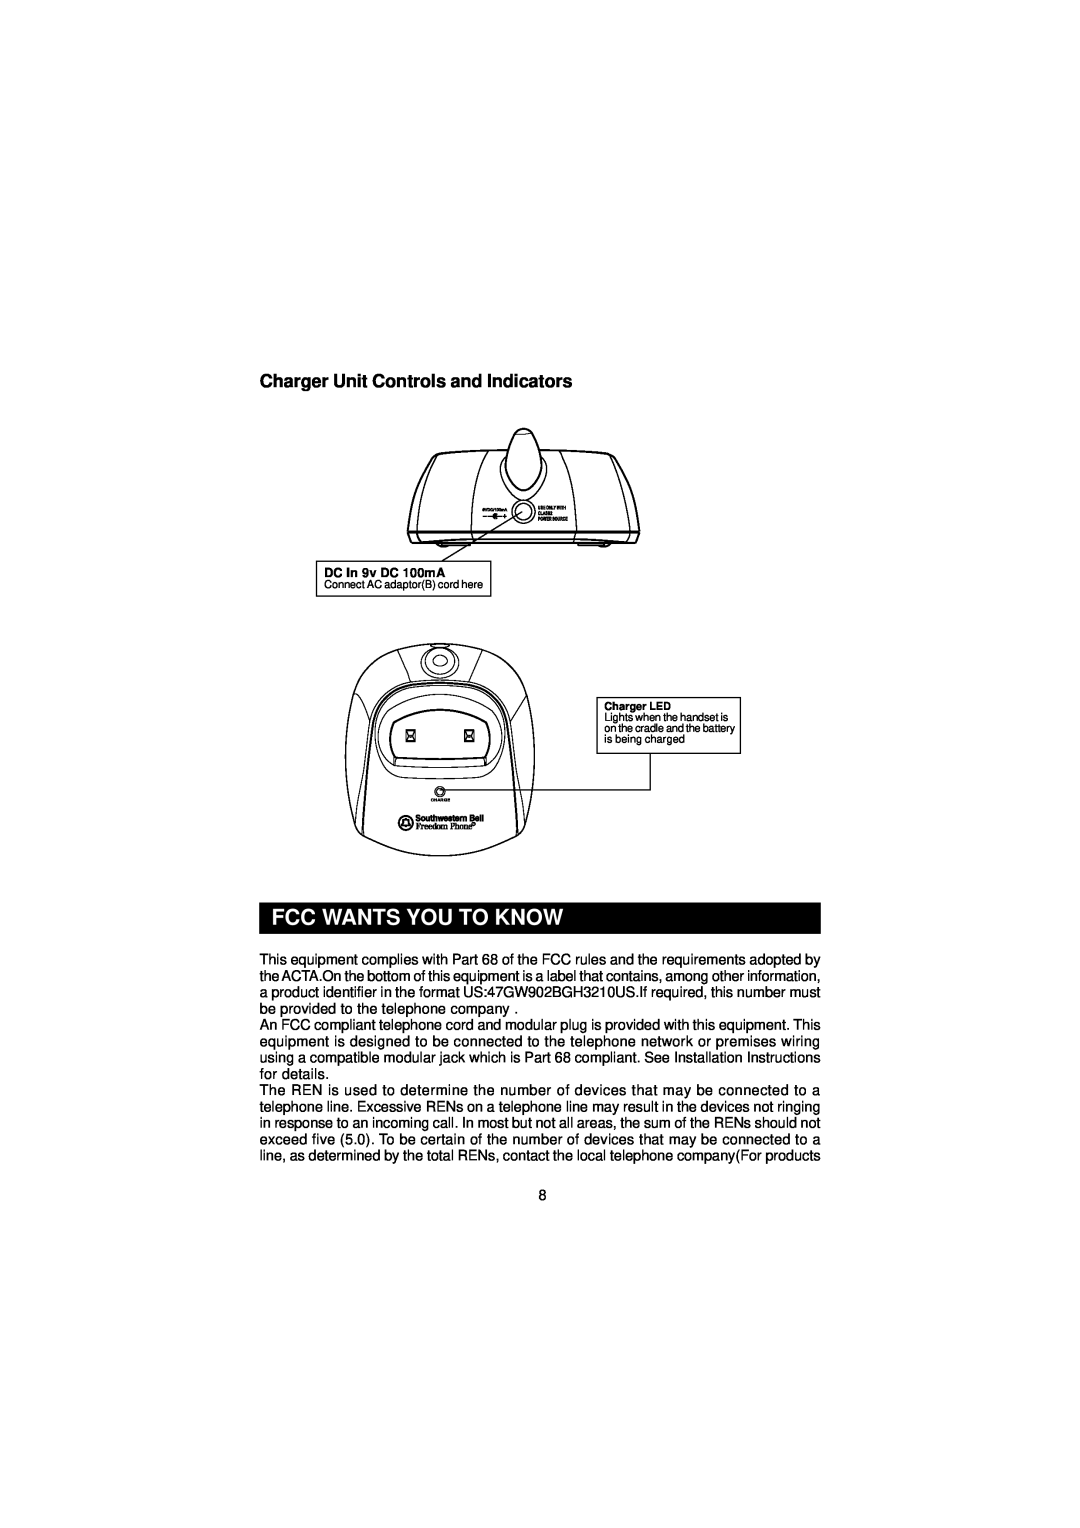 Southwestern Bell GH3210 owner manual Fcc Wants You To Know, Charger Unit Controls and Indicators 